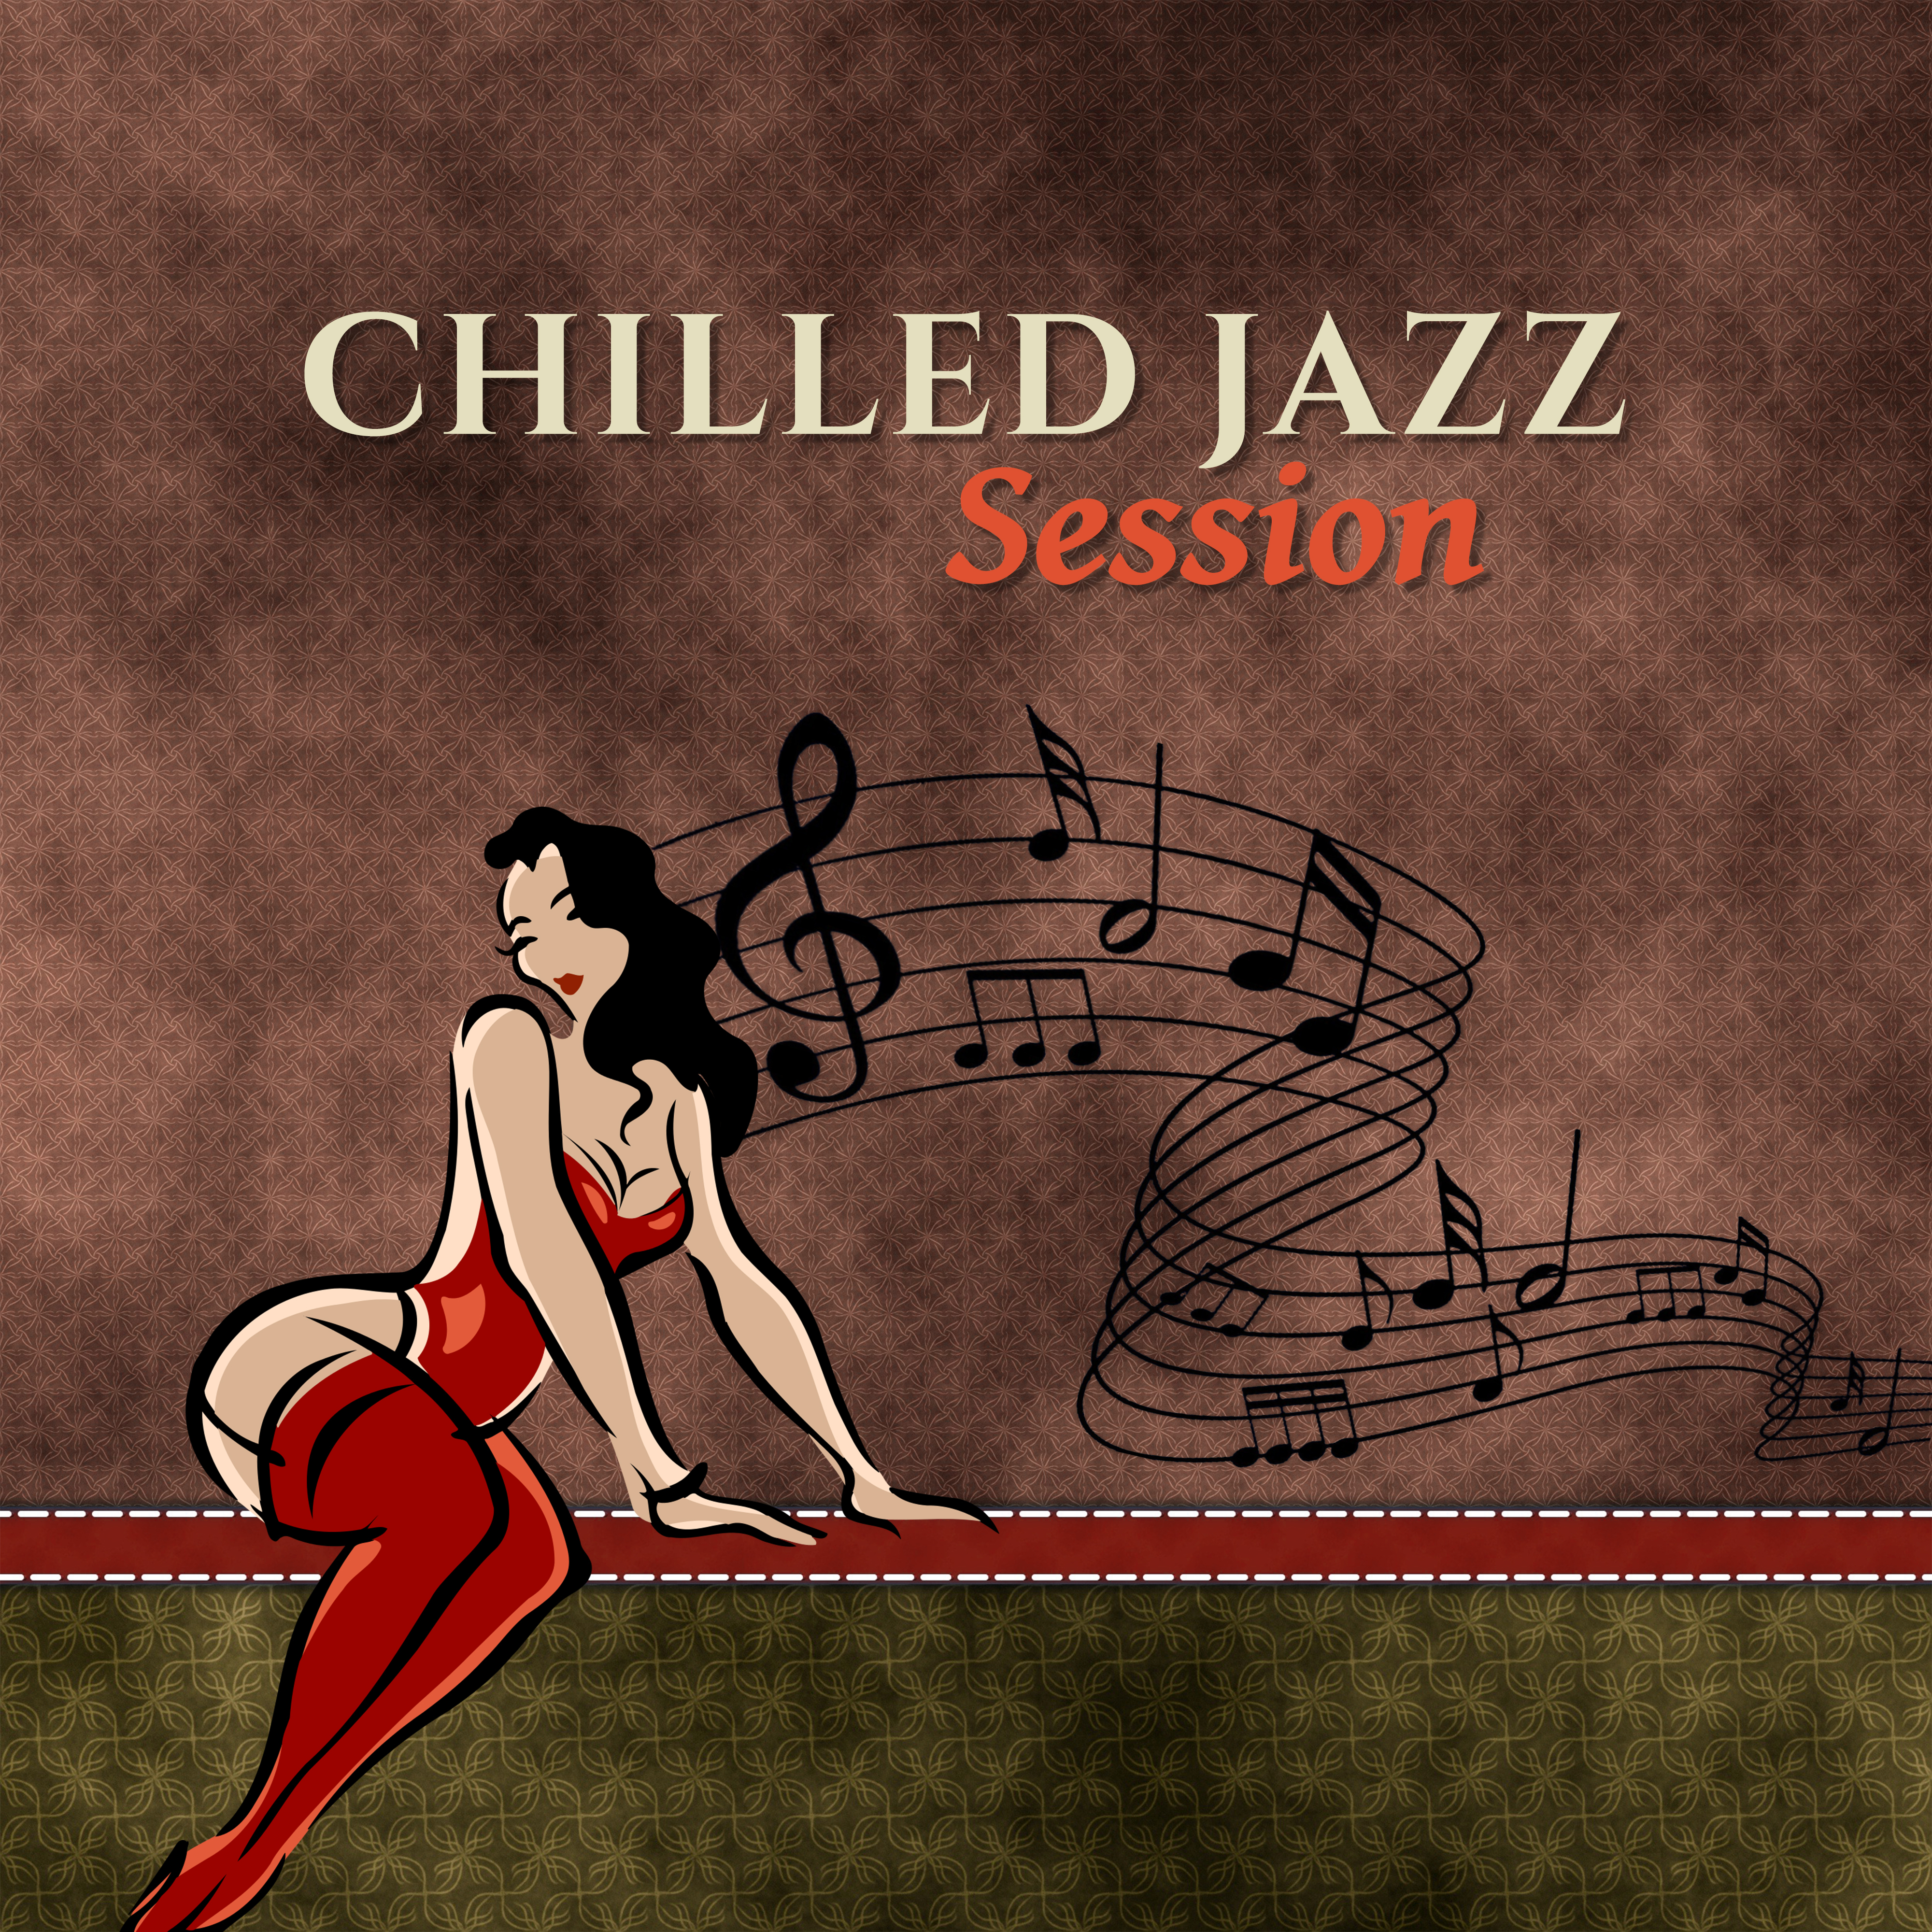 Chilled Jazz Session  Relaxing Jazz Music, Mellow Sounds of Jazz Instrumental, Easy Listening, Piano Note